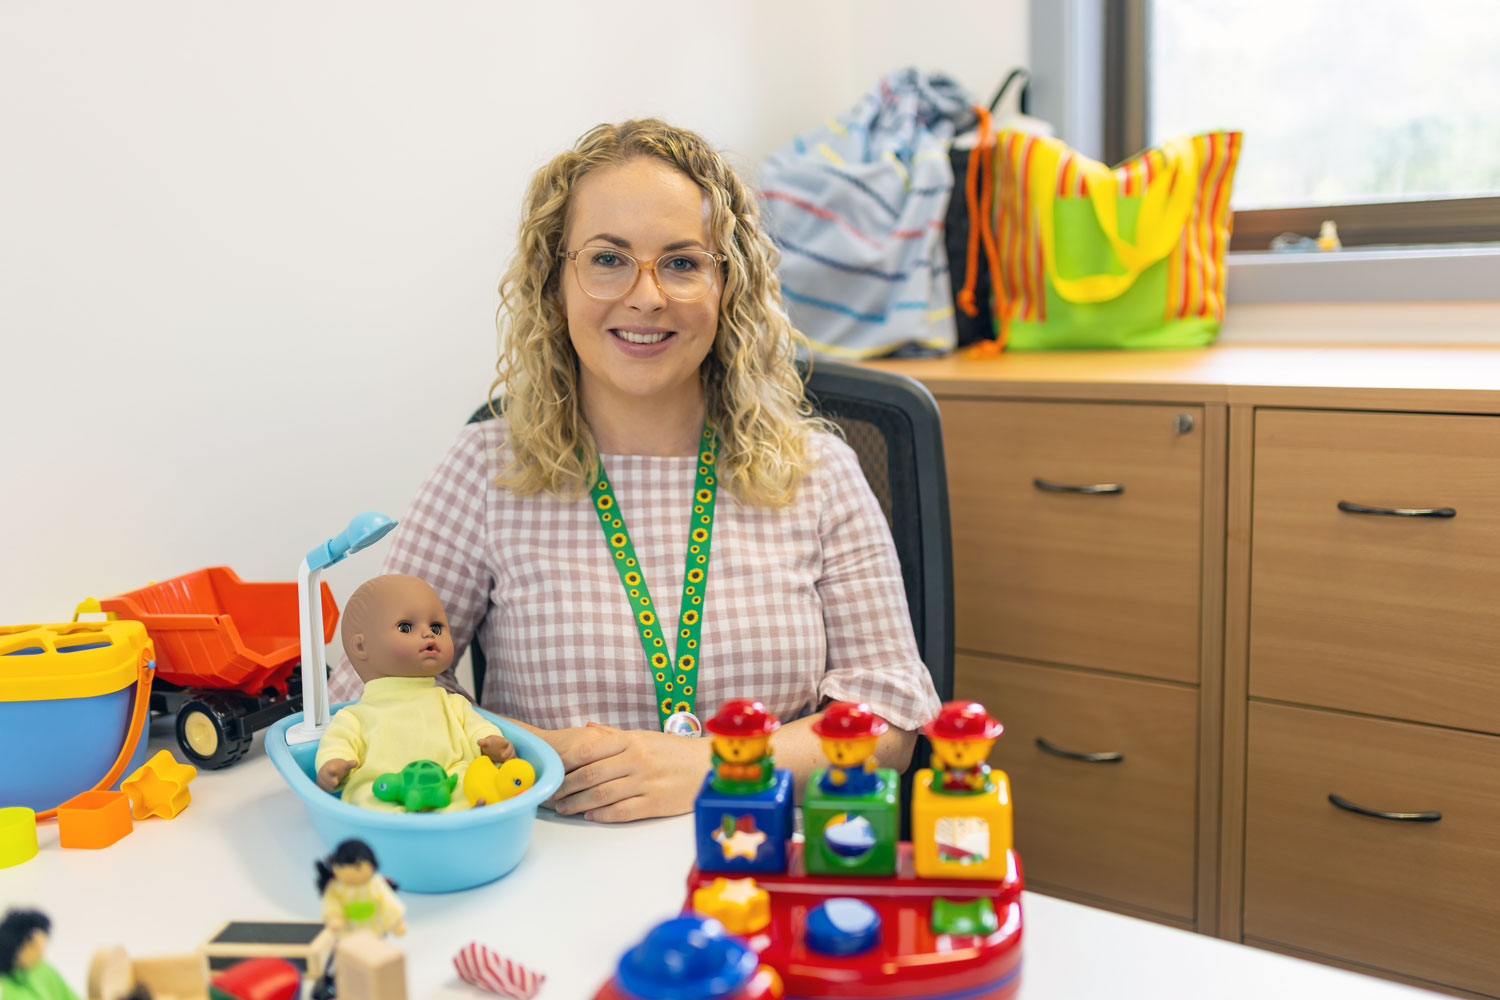 Olivia Whalen at her lab desk with children's toys